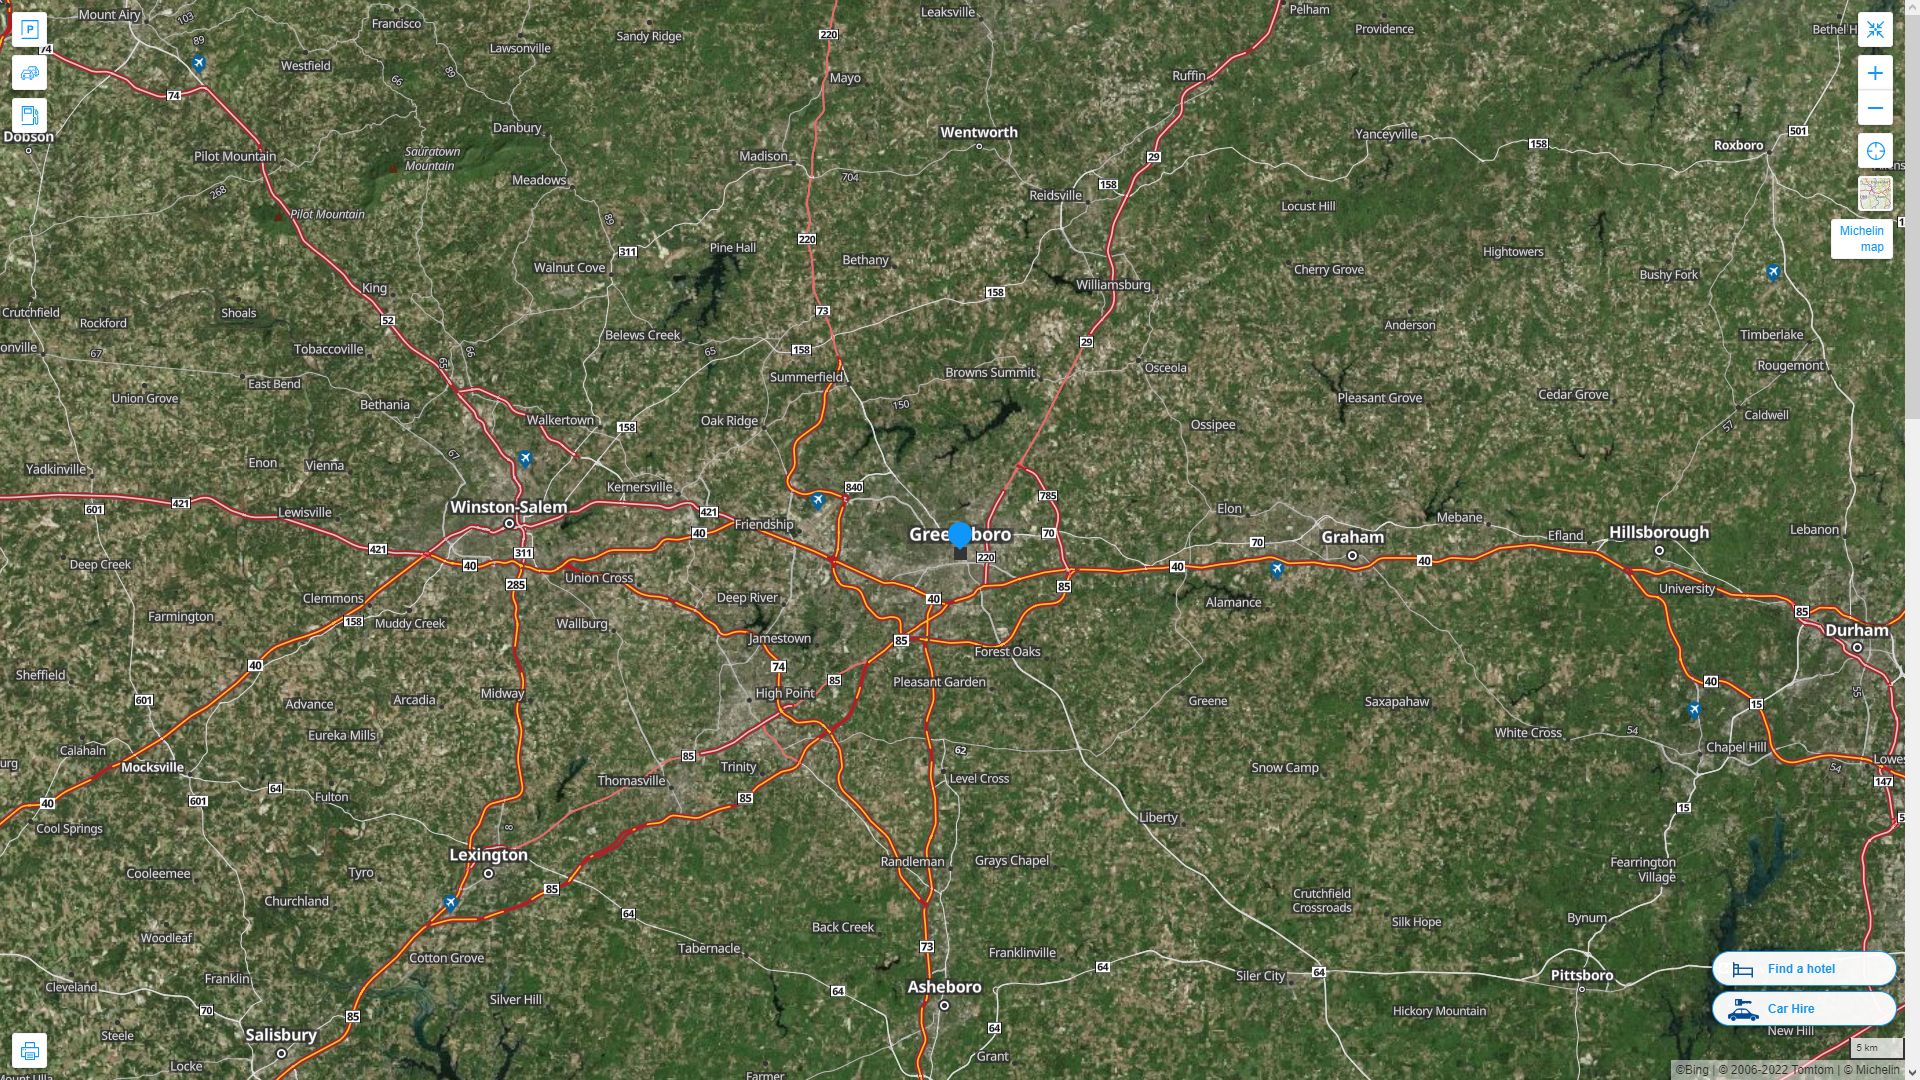 Greensboro North Carolina Highway and Road Map with Satellite View